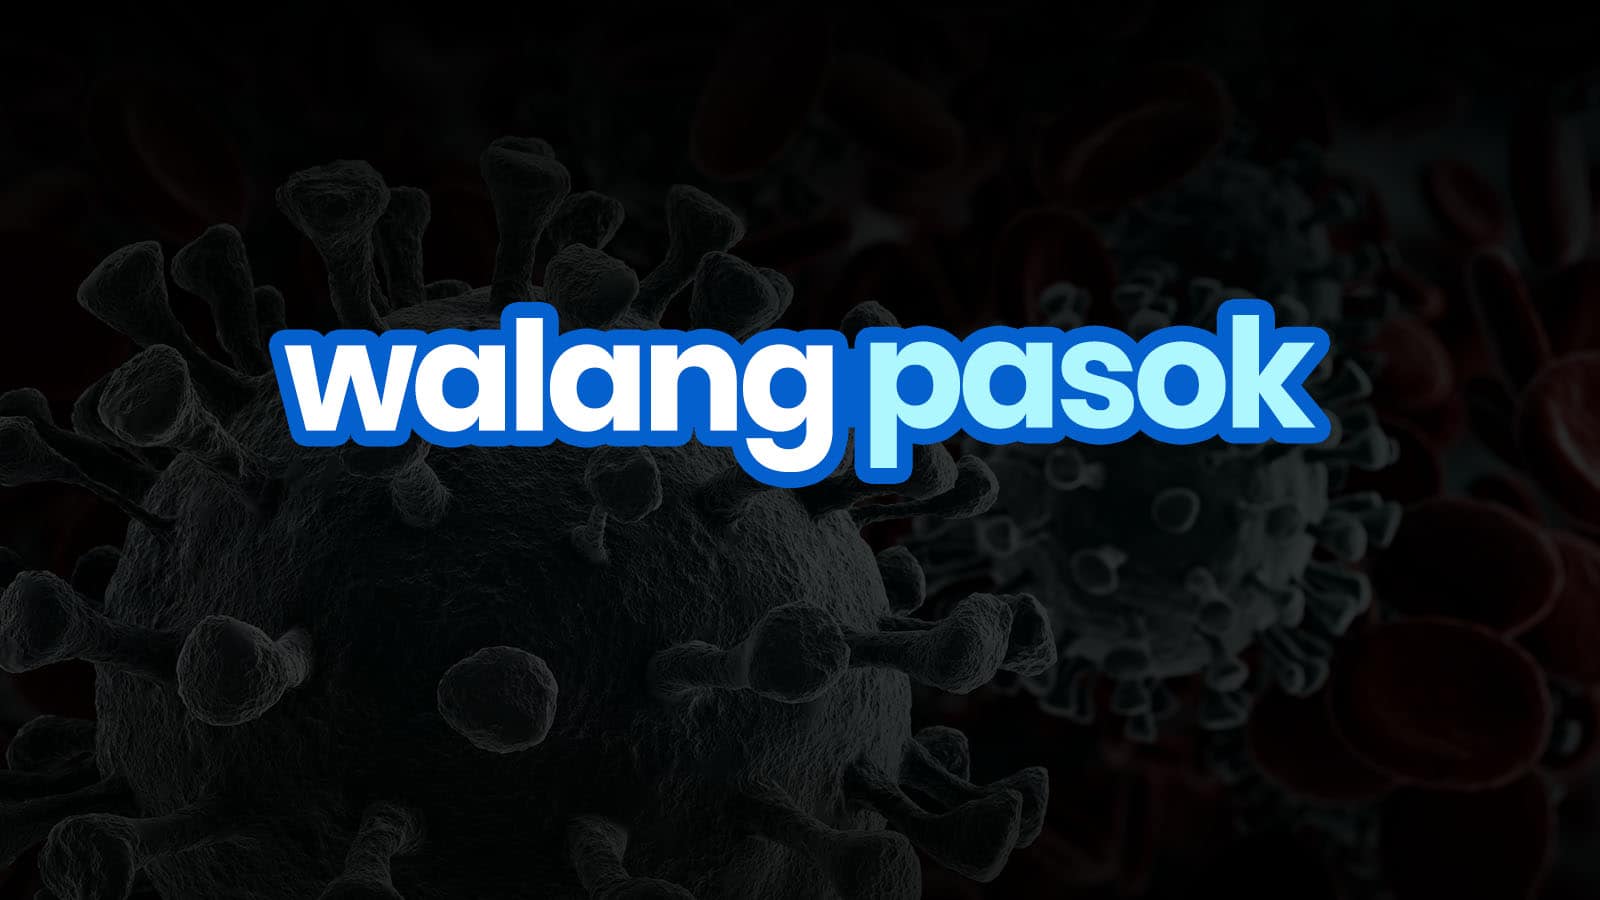 WALANG PASOK: List of Class Suspensions for March-April 2020 Due to COVID-19 Threat